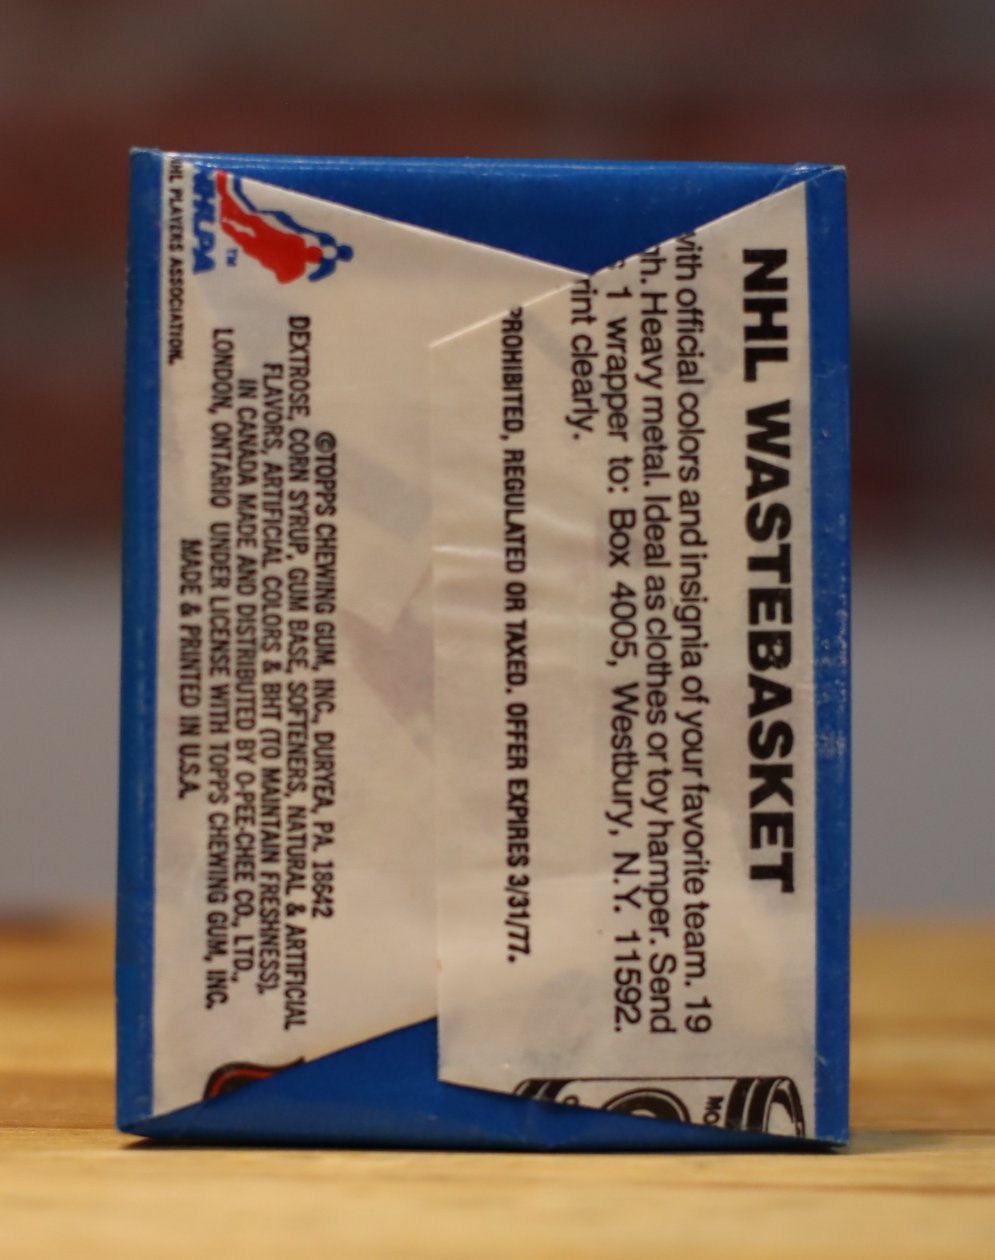 1977/78 Topps Hockey Cards Unopened Wax Pack - Look For Ken Dryden, Bobby Orr